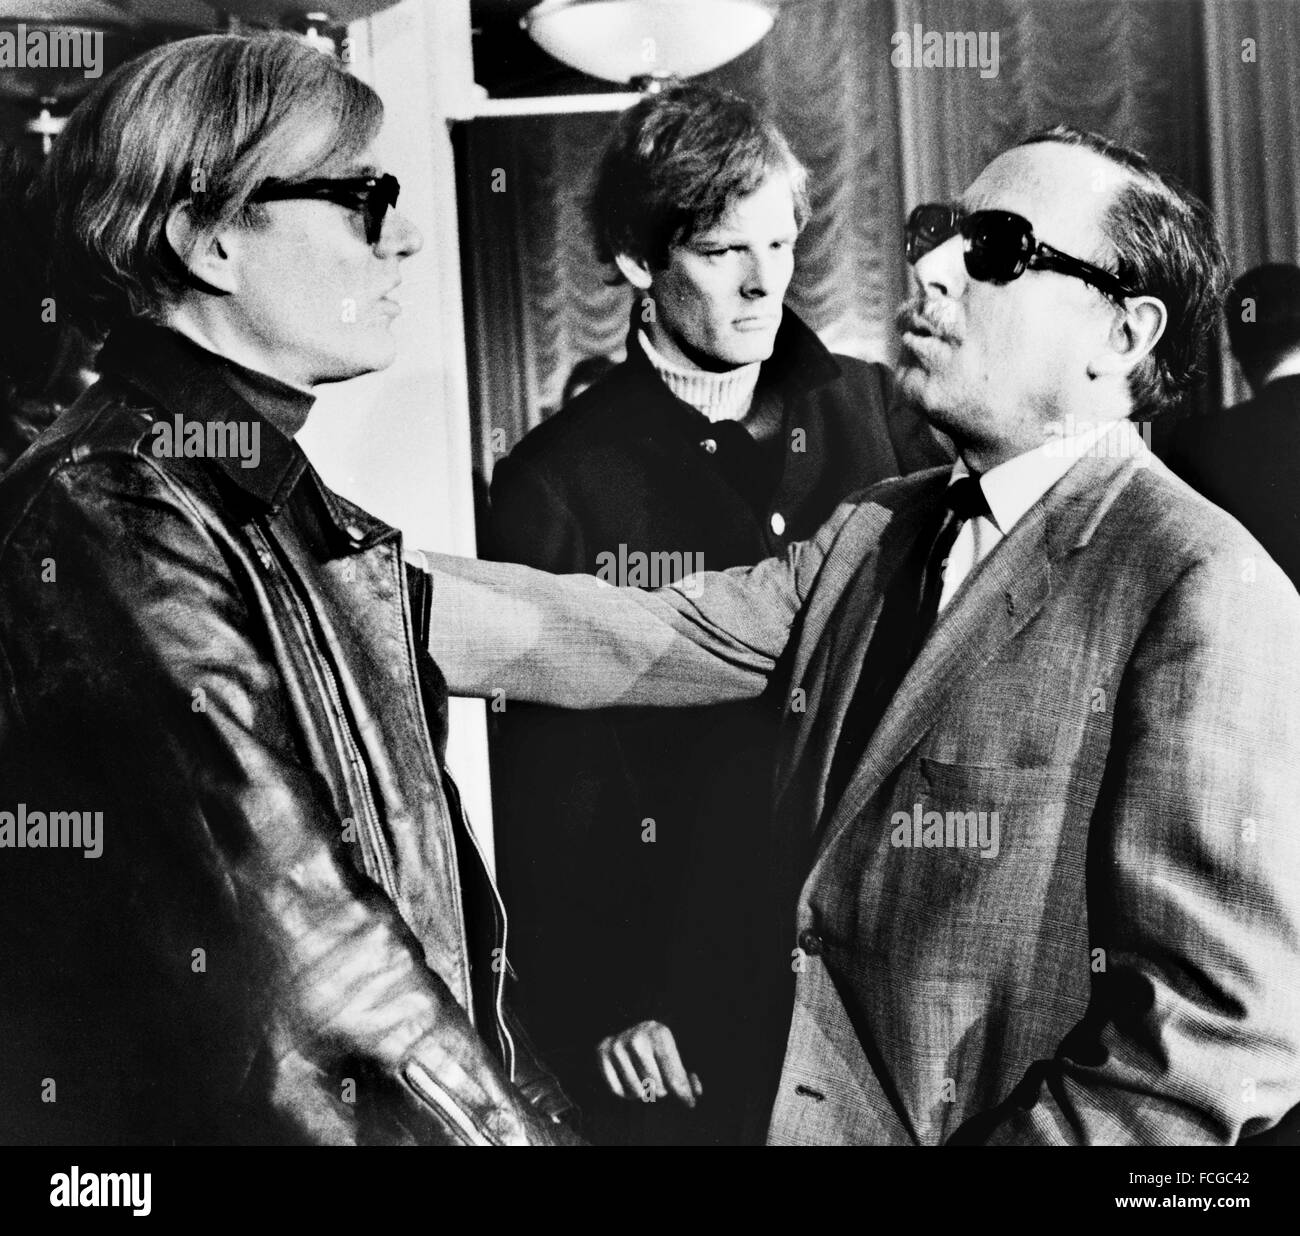 Artist Andy Warhol (left) and playwright Tennessee Williams (right) with film director Paul Morrissey in the background), S.S. France, 1967 Stock Photo